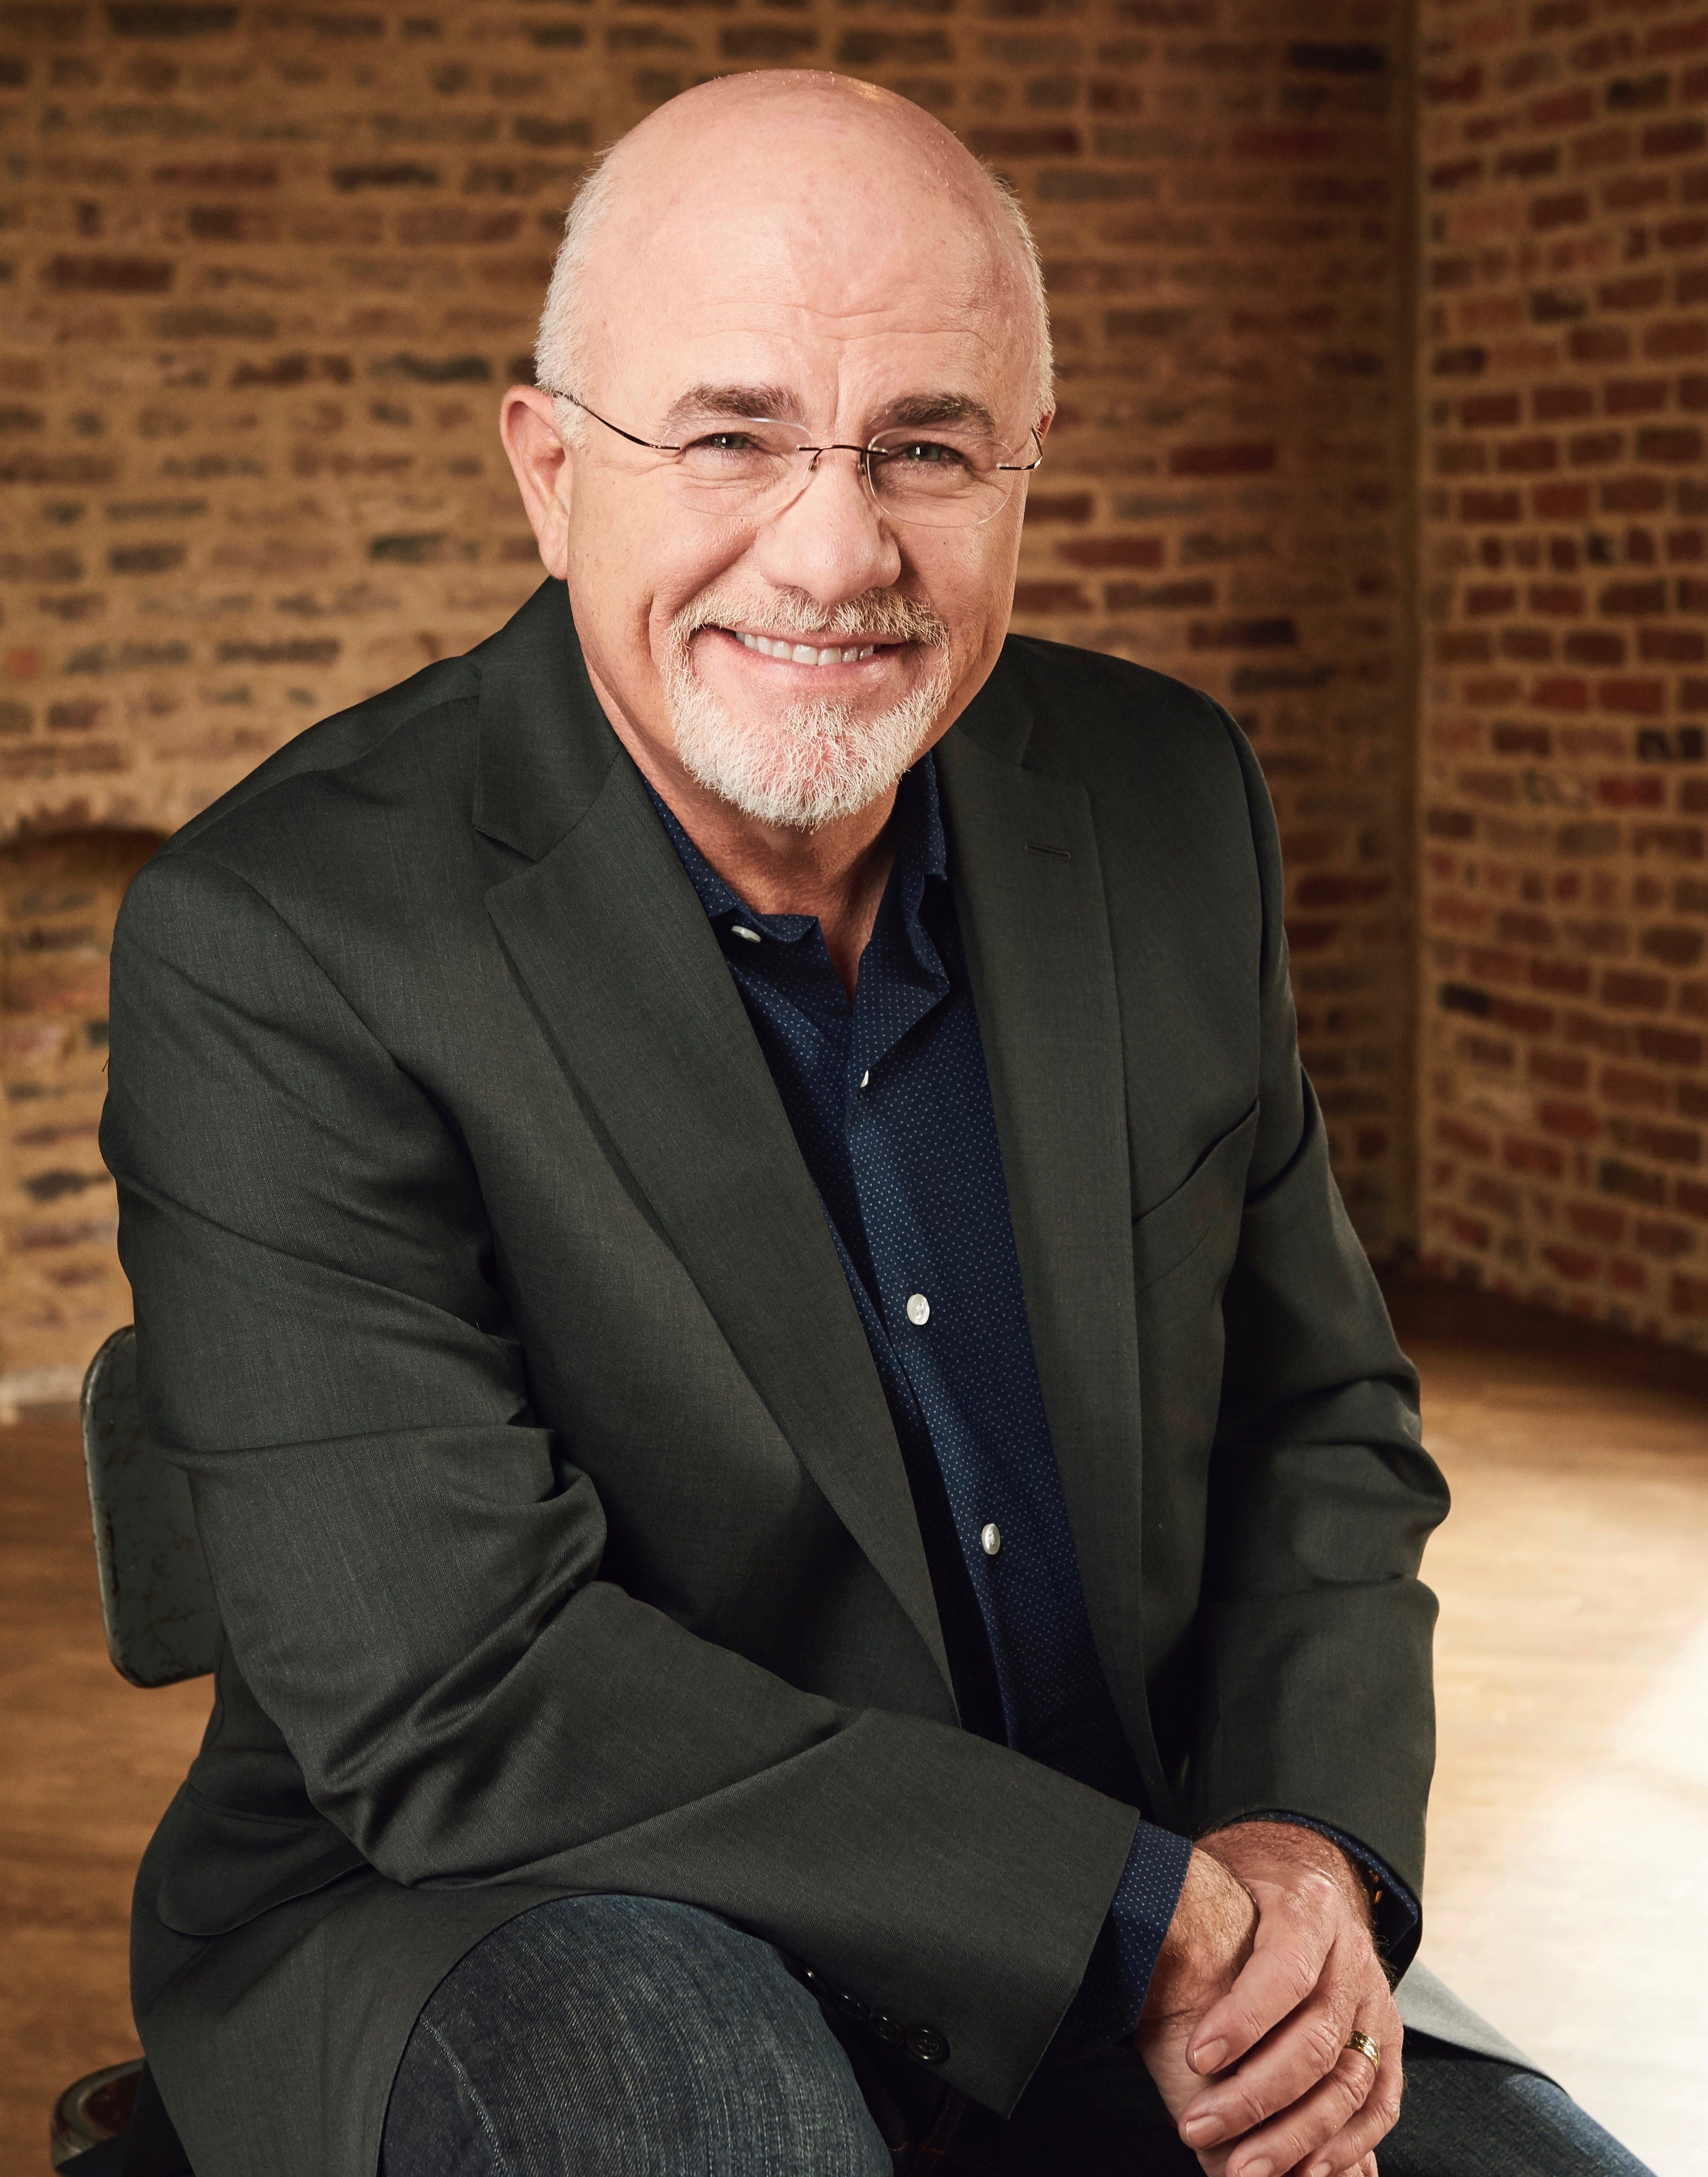 Dave Ramsey Don't take financial advice from broke people